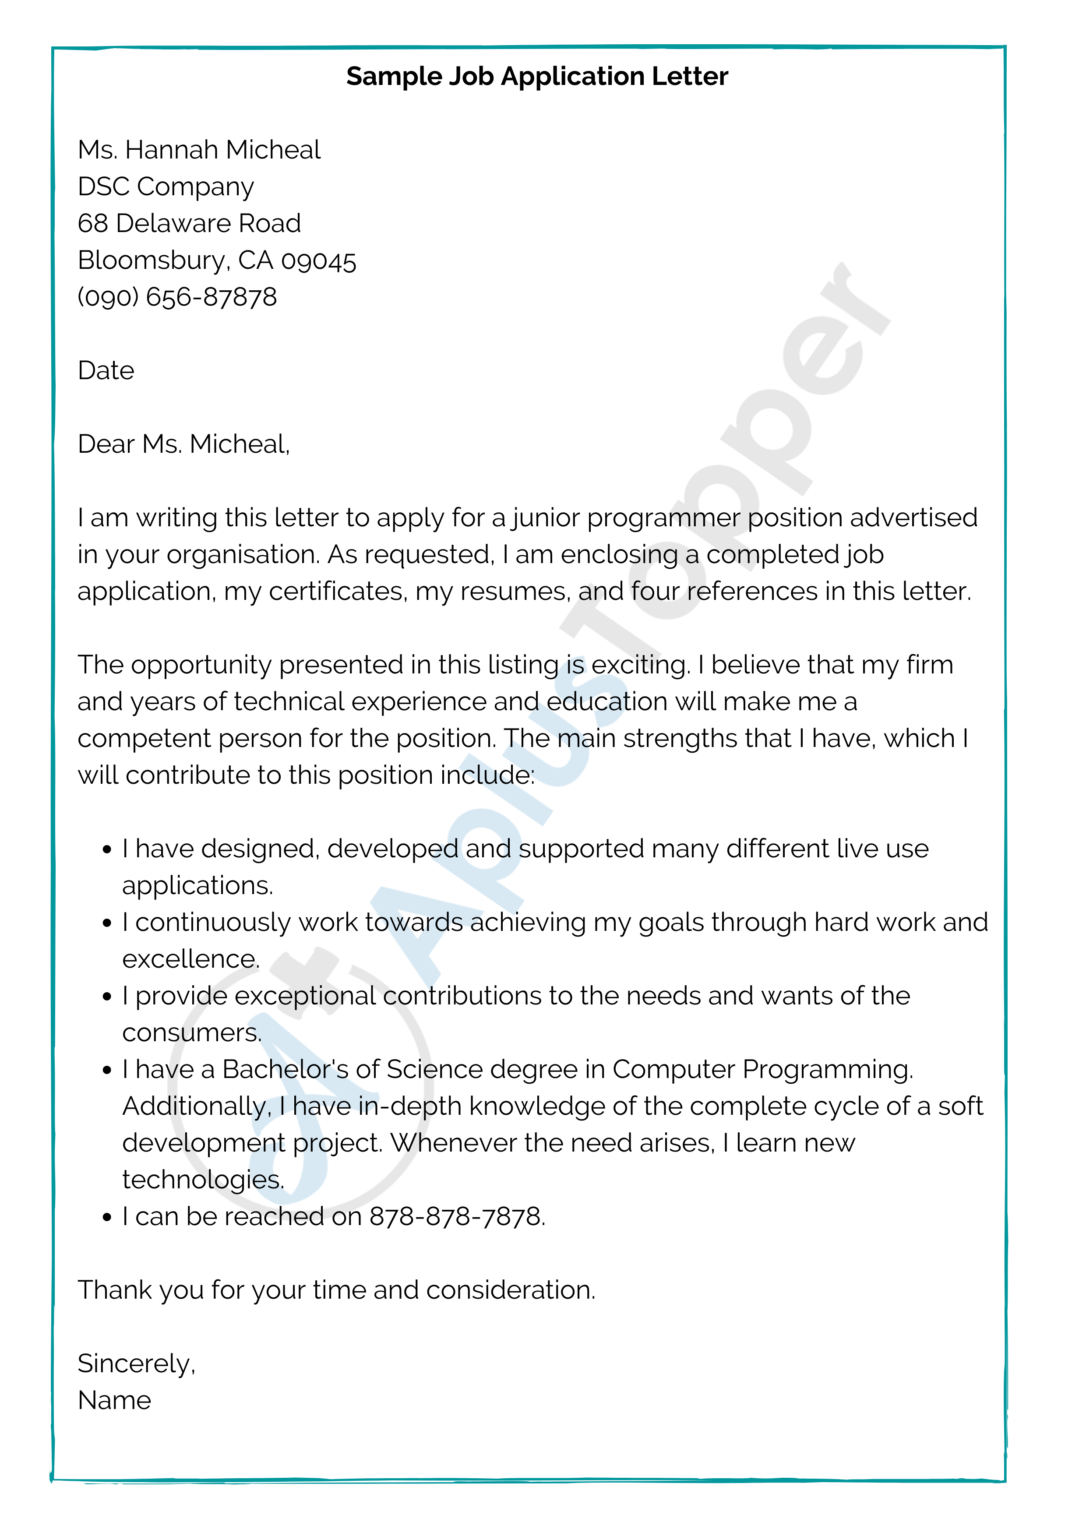 the application letter and the resume perform mcq